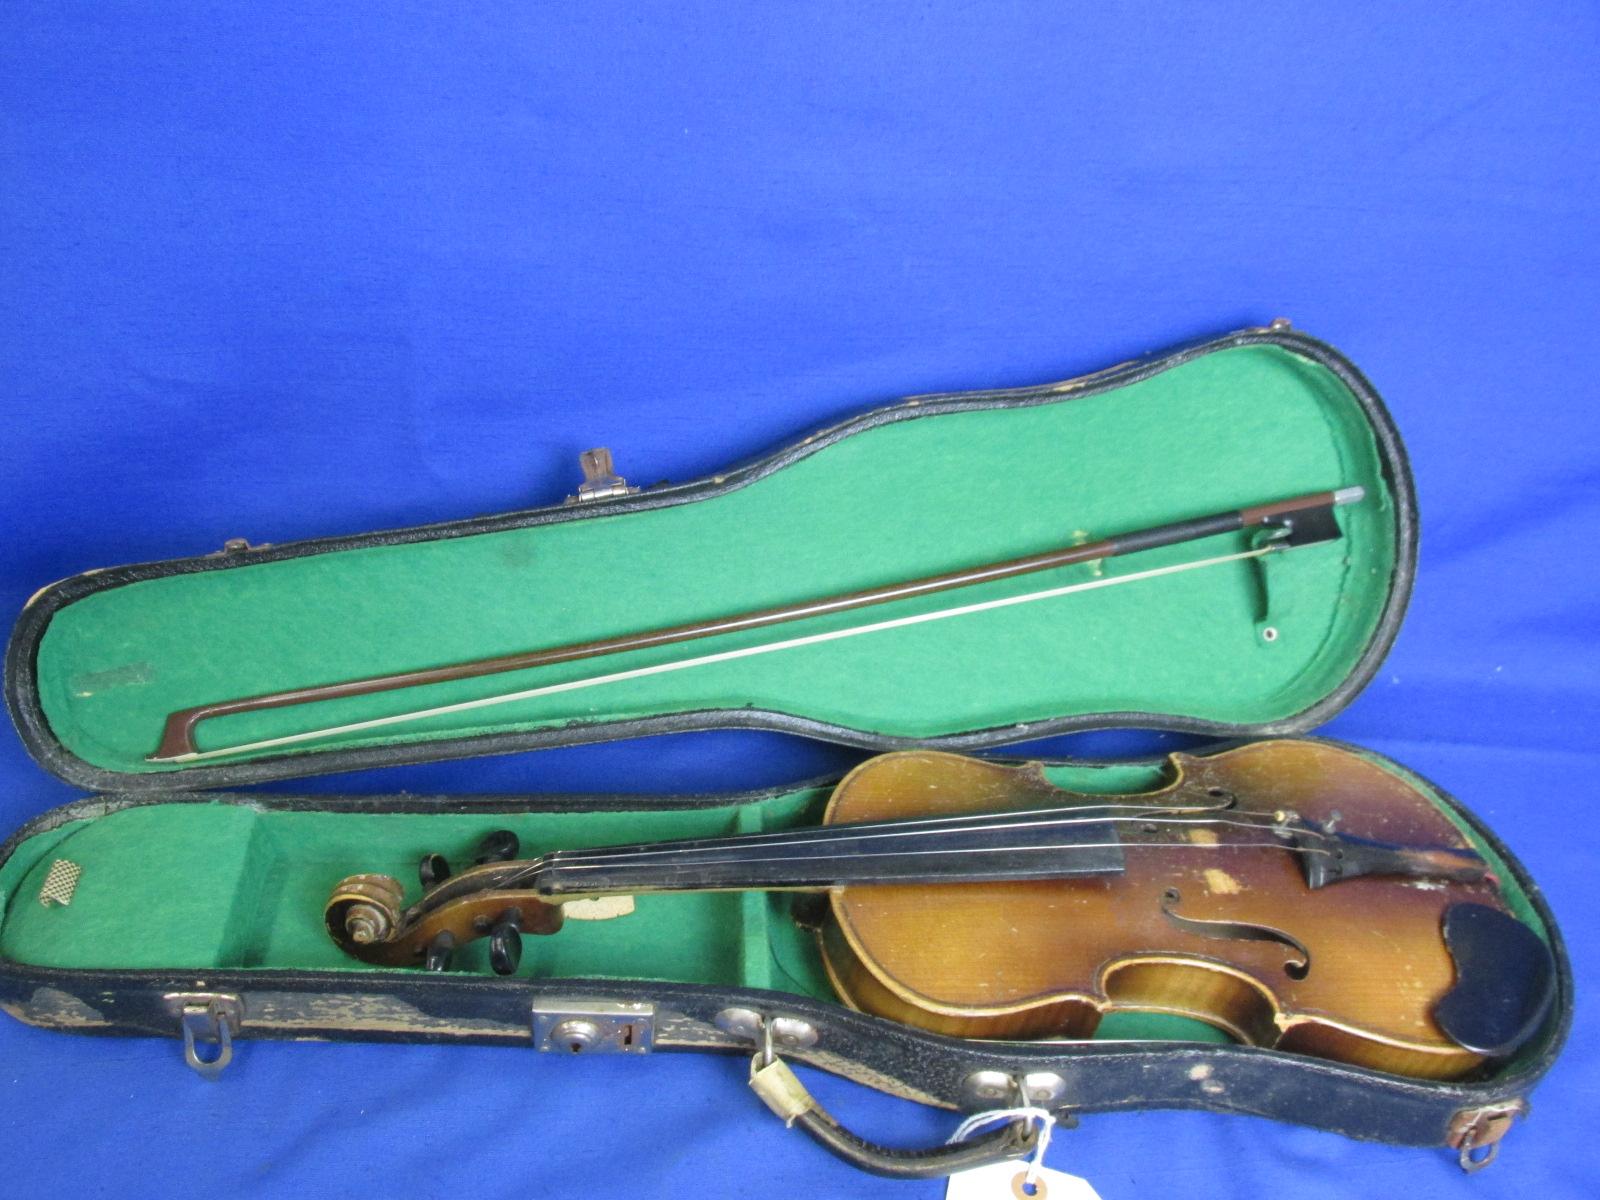 Antique Czech Made Ton Klar Violin with Bow (unmarked) in Antique Hard Case – See Pix